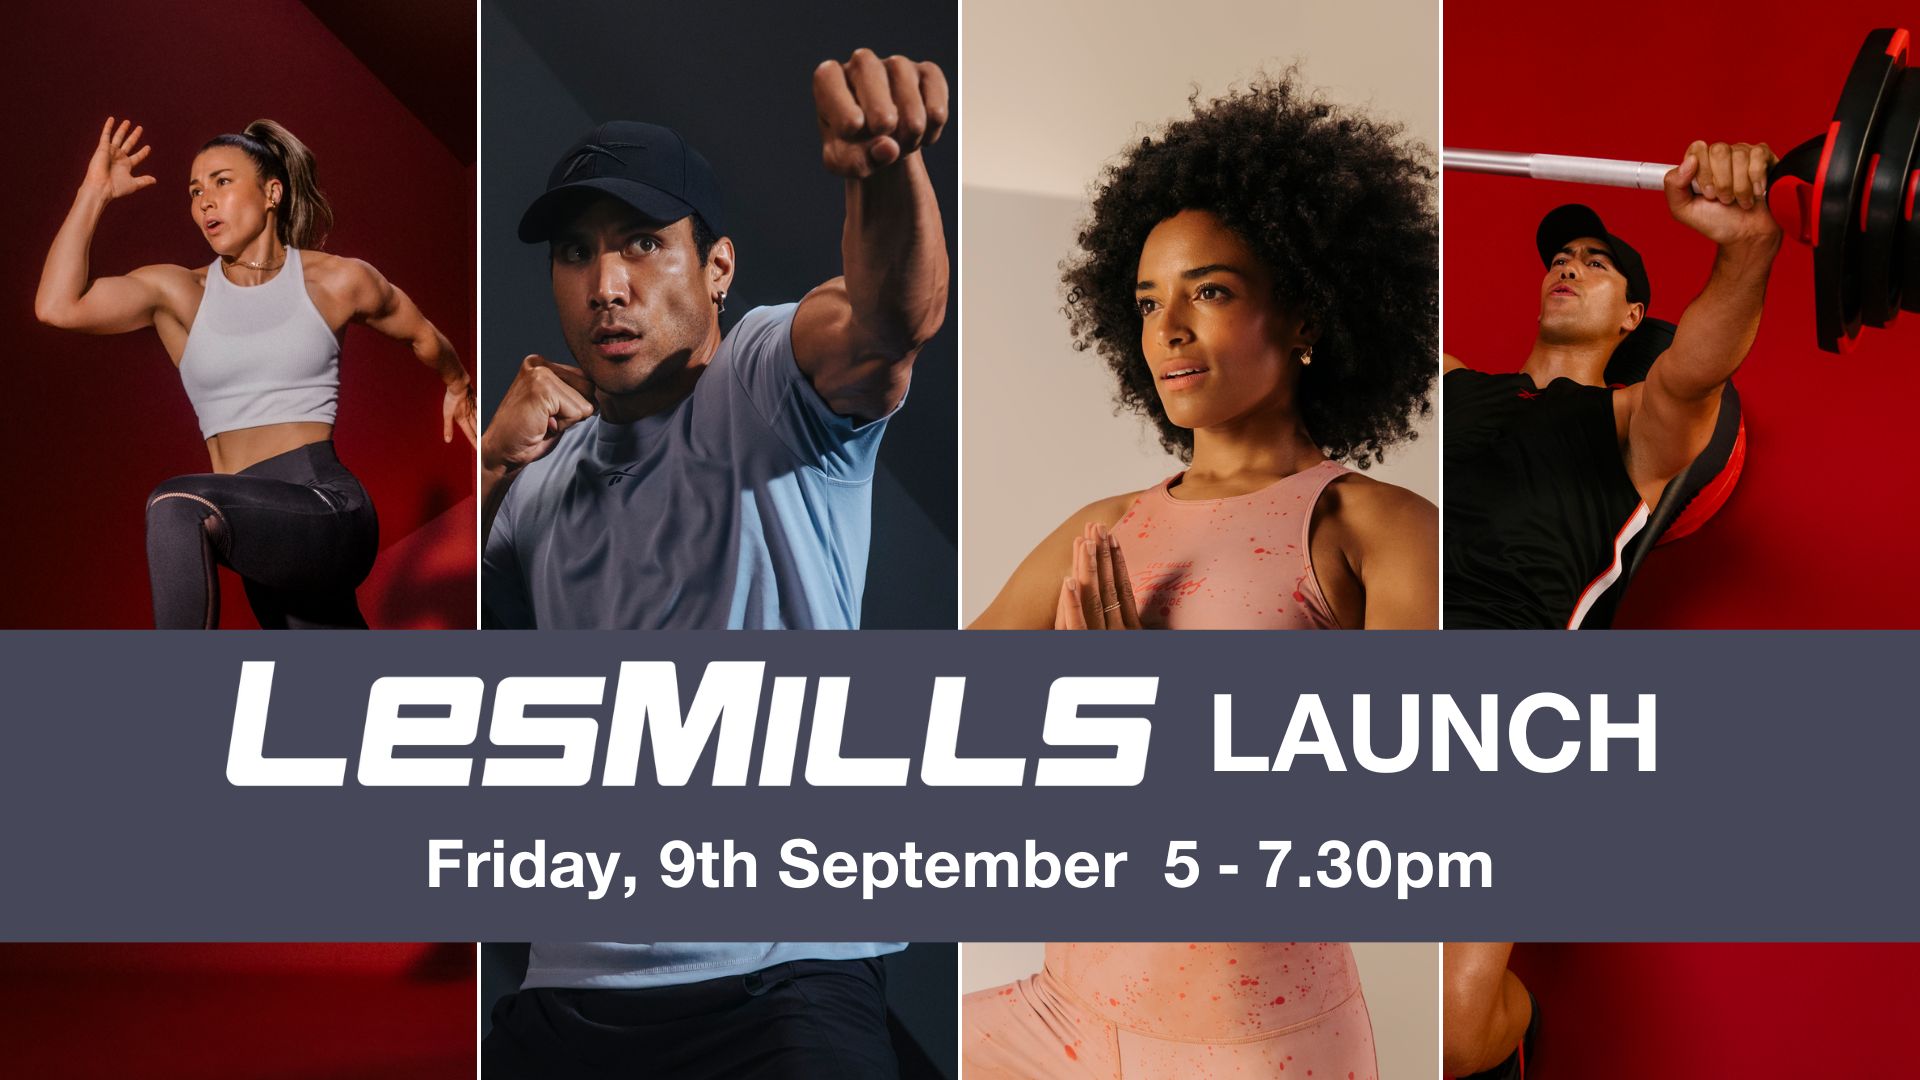 Les Mills Autumn Launch 9th September Club Towers